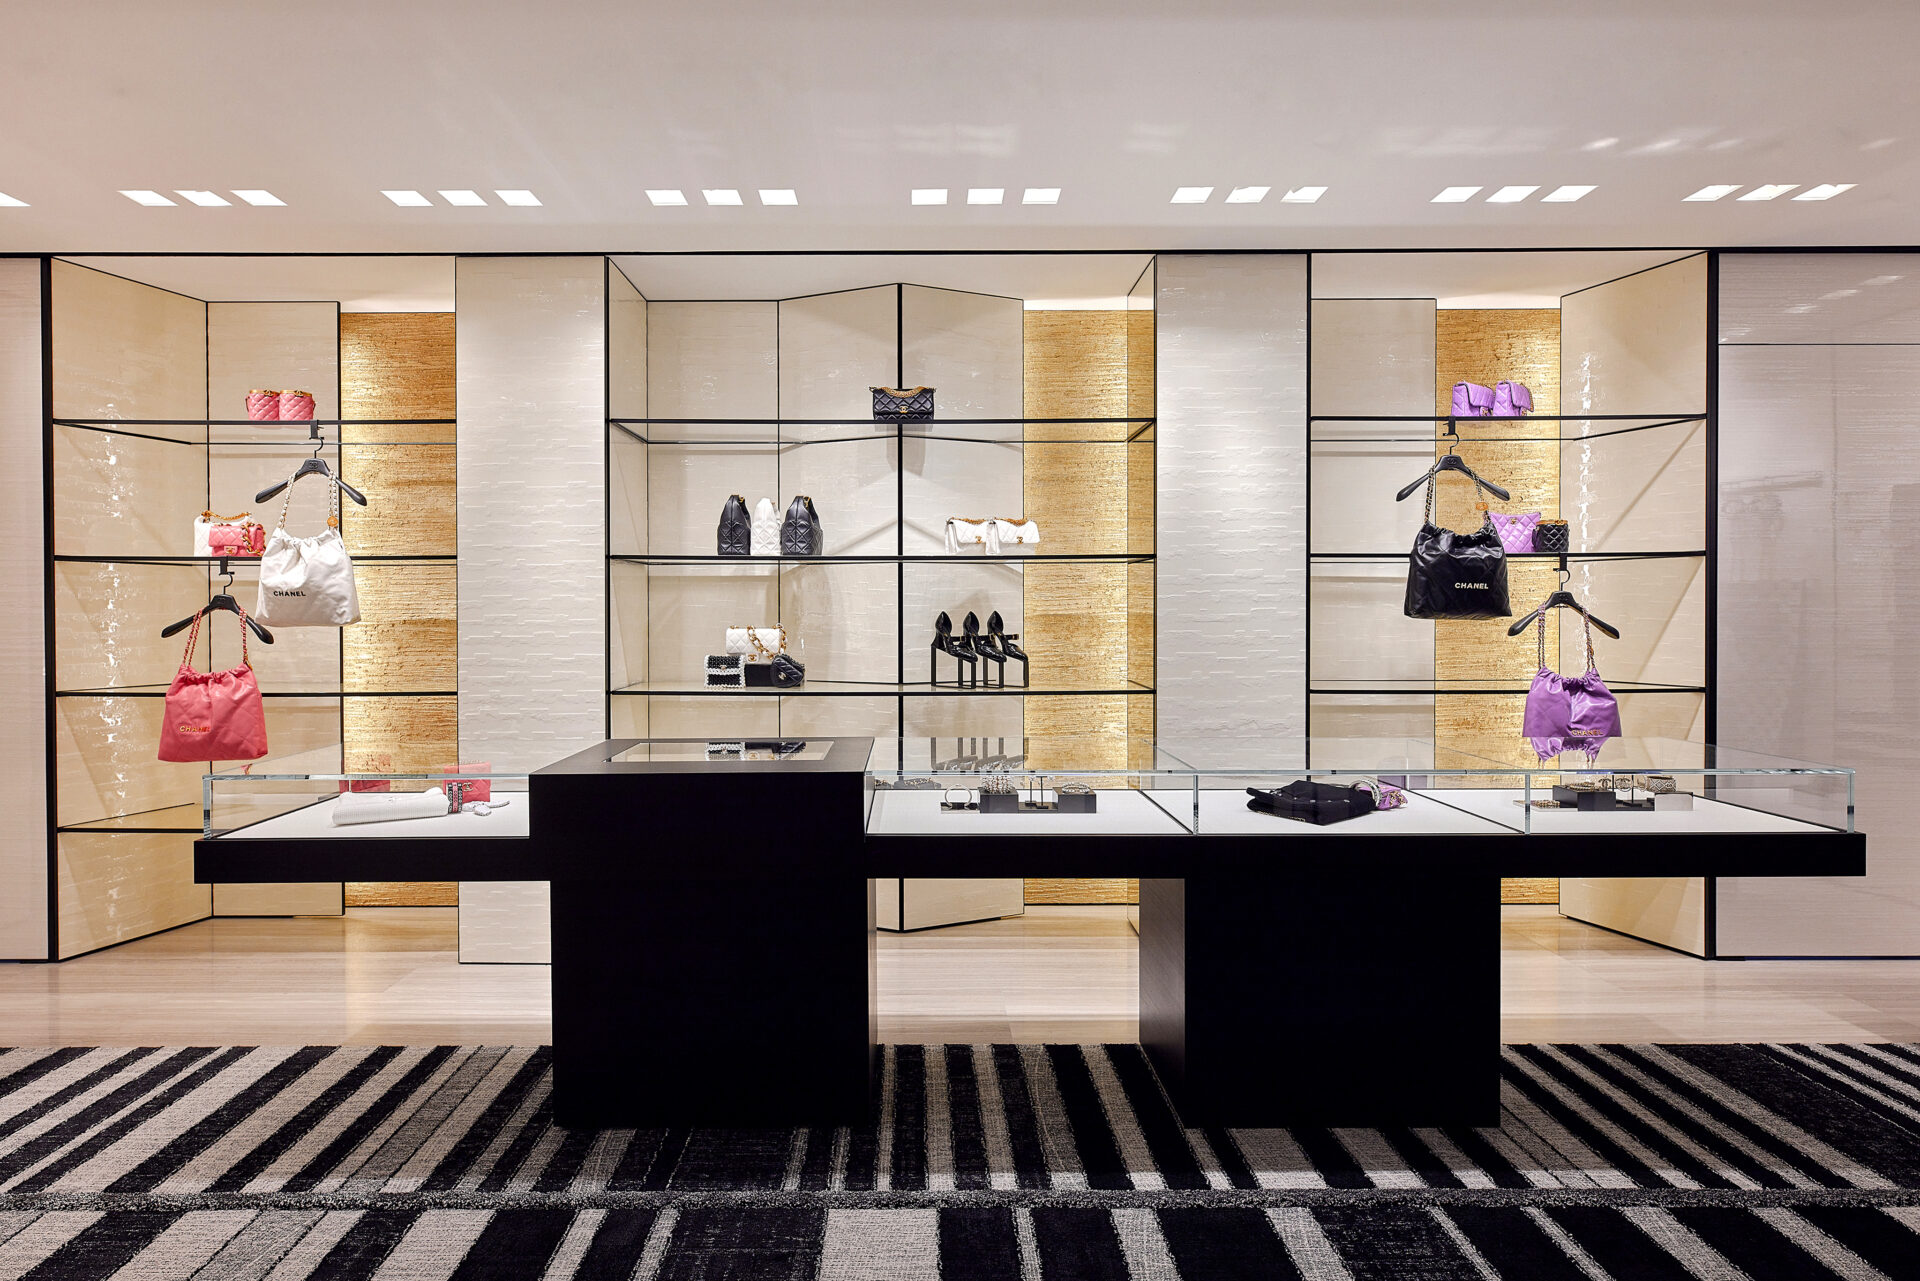 CHANEL OPENS FIRST COMBINED FASHION AND FRAGRANCE BOUTIQUE IN PERTH ...